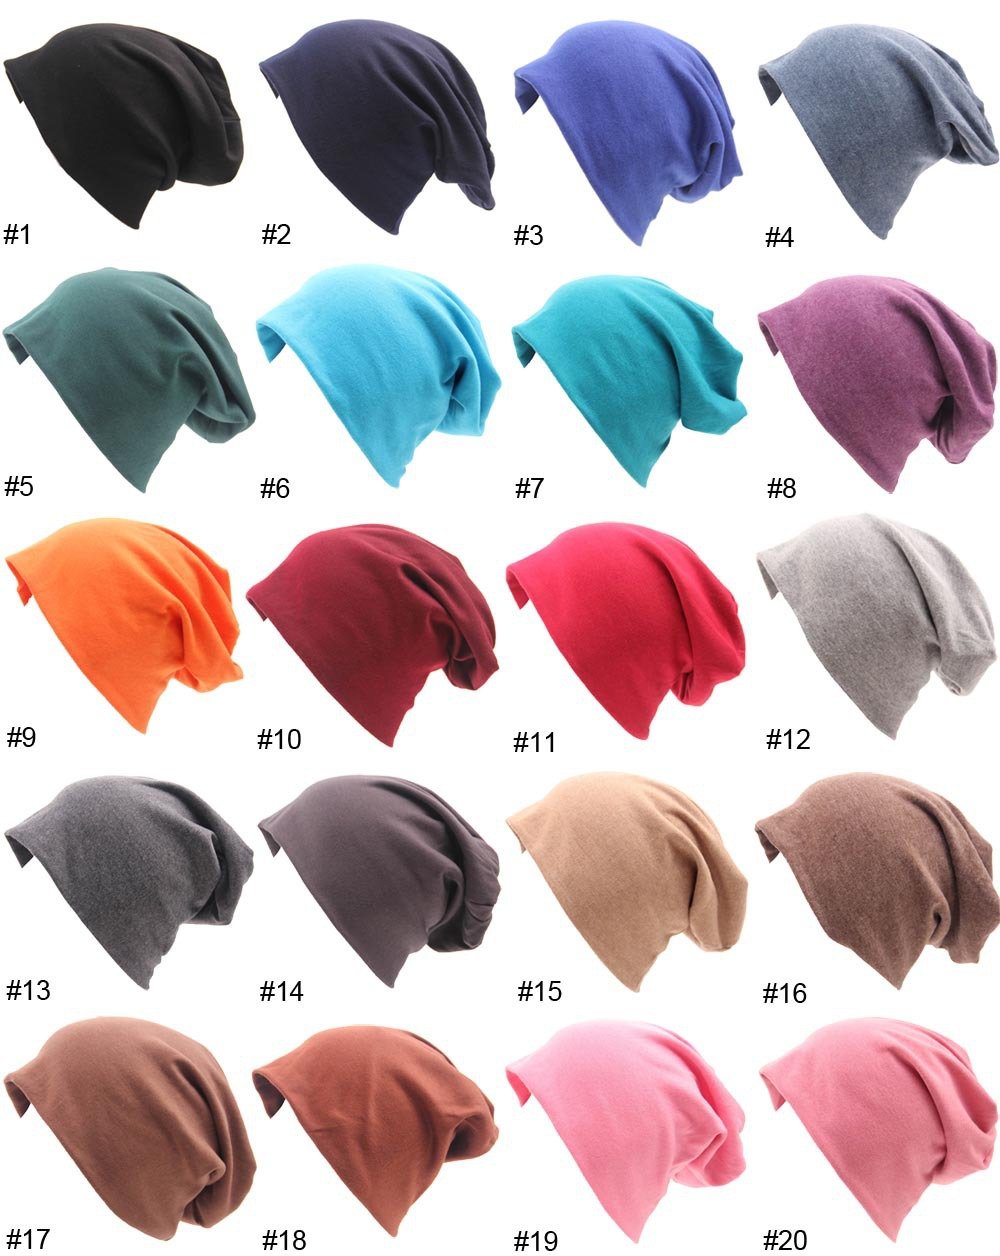 Hip-hop Soft Stretch Slouchy Solid Color Skull Cap